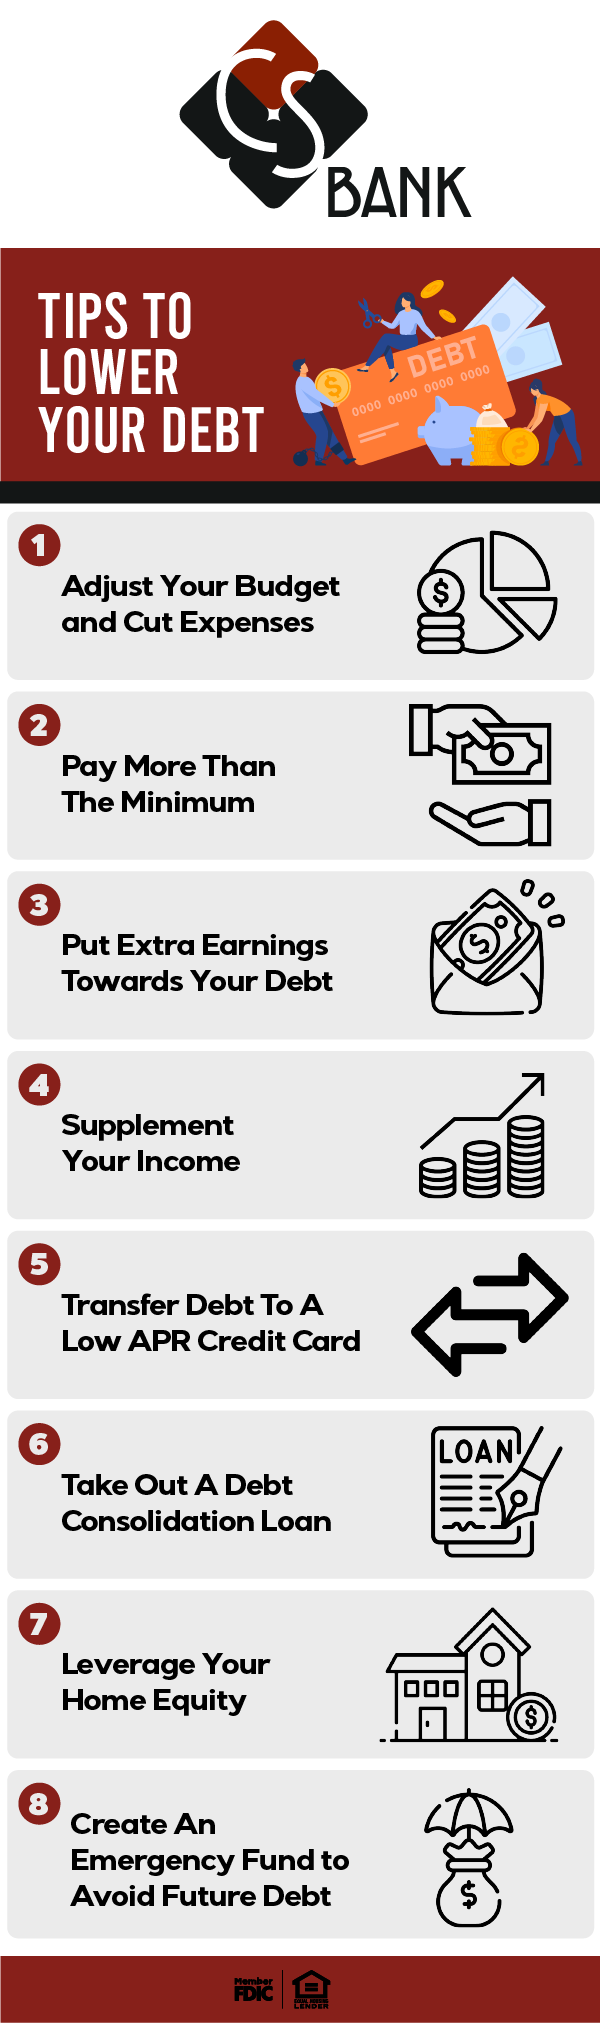 Tips To Lower Your Debt
1 Adjust Your Budget and Cut Expenses
2 Pay More Than The Minimum
3 Put Extra Earnings Towards Your Debt
4 Supplement Your Income
5 Transfer Debt To A Low APR Credit Card
6 Take Out A Debt Consolidation Loan 
7Leverage Your Home Equity
8Create An Emergency Fund to Avoid Future Debt 